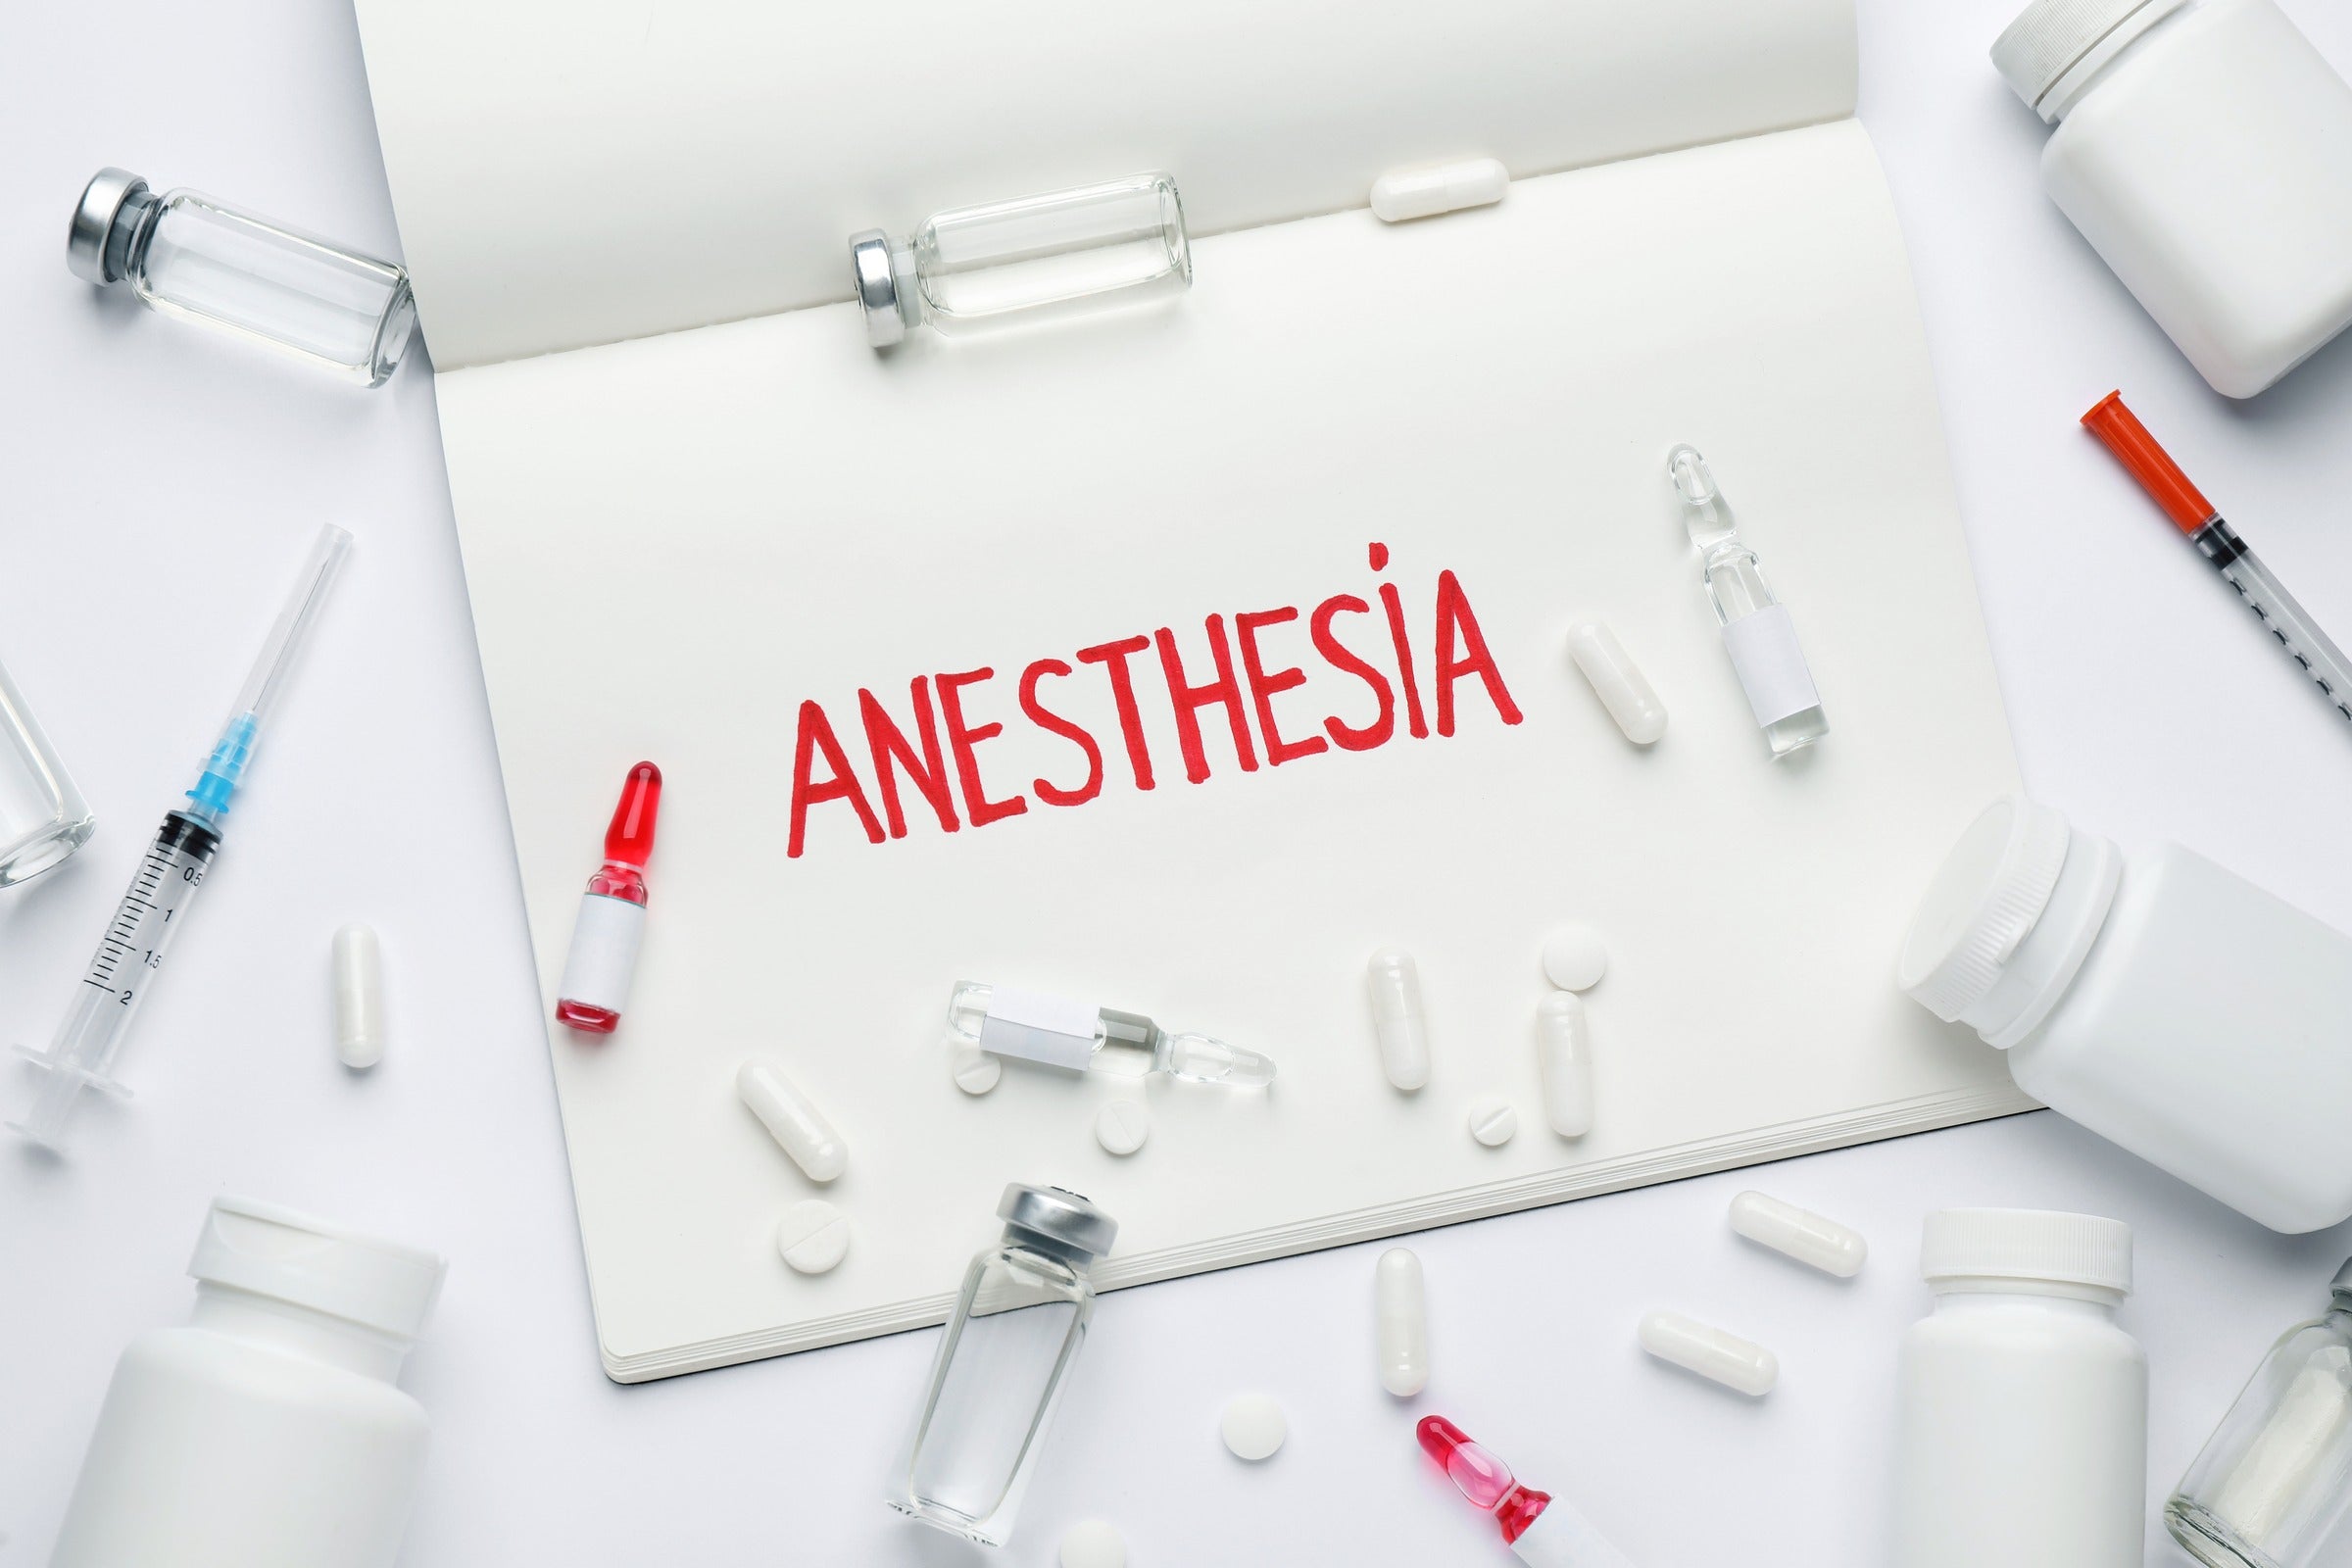 Two types of anesthesia are available for hemorrhoid banding